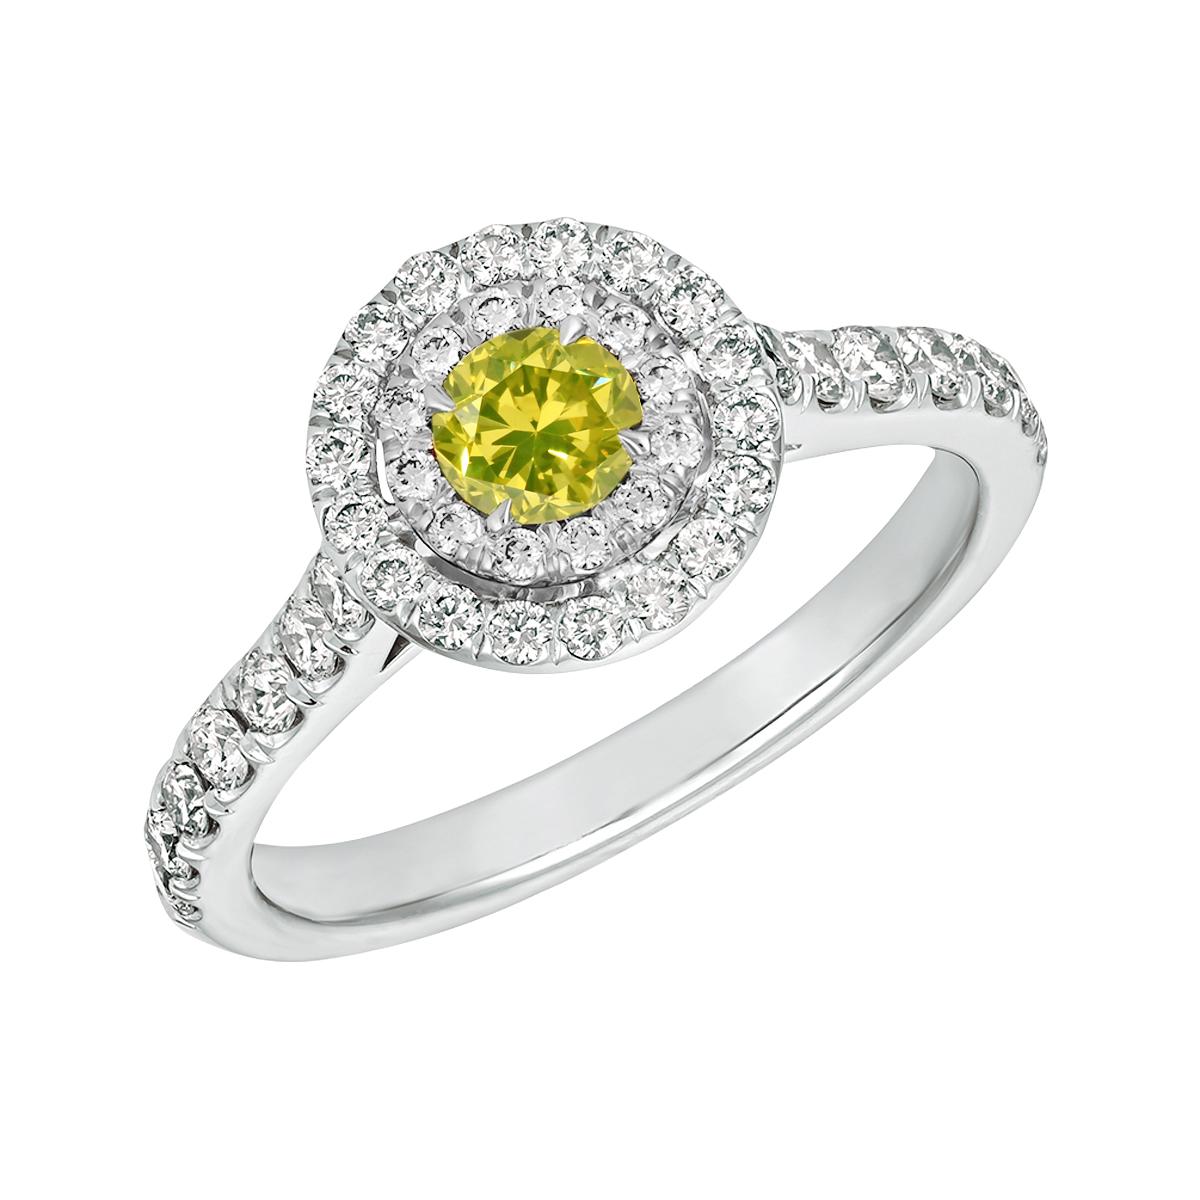 Fancy Intense Green Yellow 0.53 carat Round cut. Treated color.
GIA certificate 2235091885.
Centering white diamond on white 18K gold ring.


Fancy Intense Green Yellow
Dimensions: 5.13 - 5.29 x 3.16 mm.

Can be size upon request. About 10 days